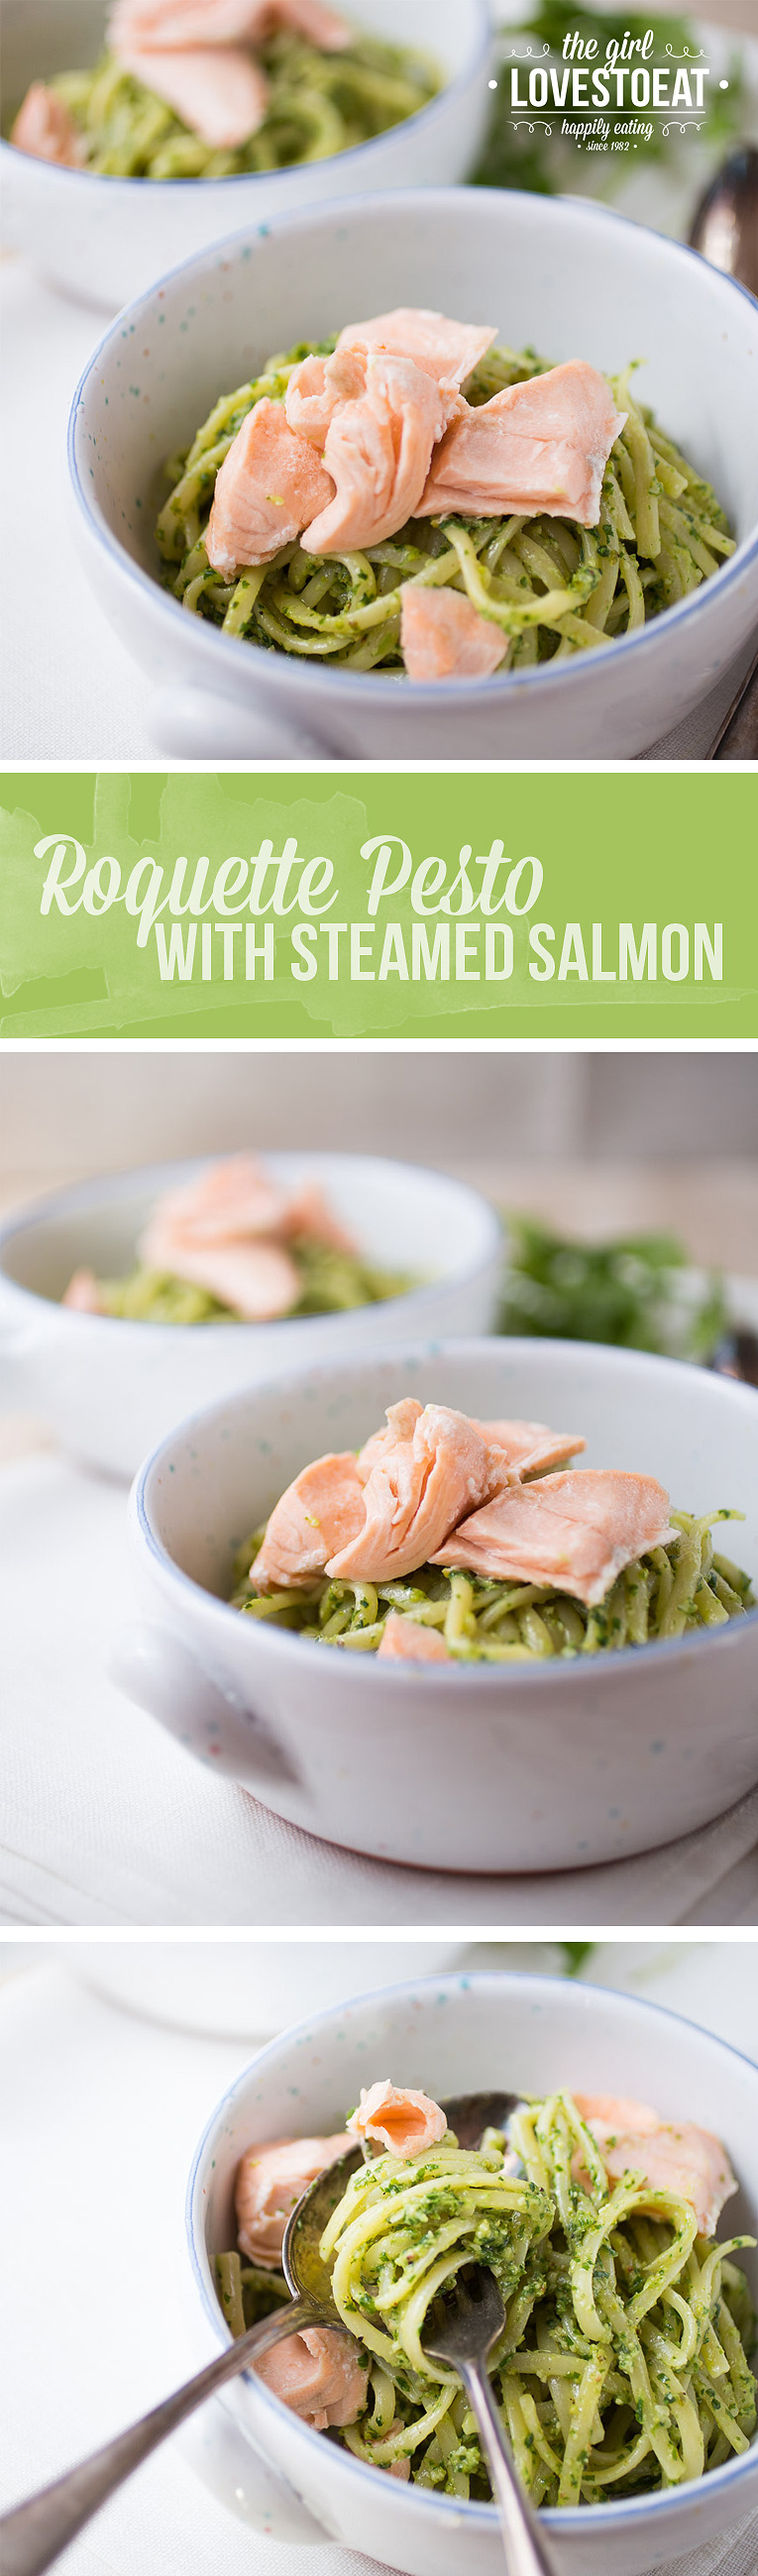 Roquette pesto with steamed salmon